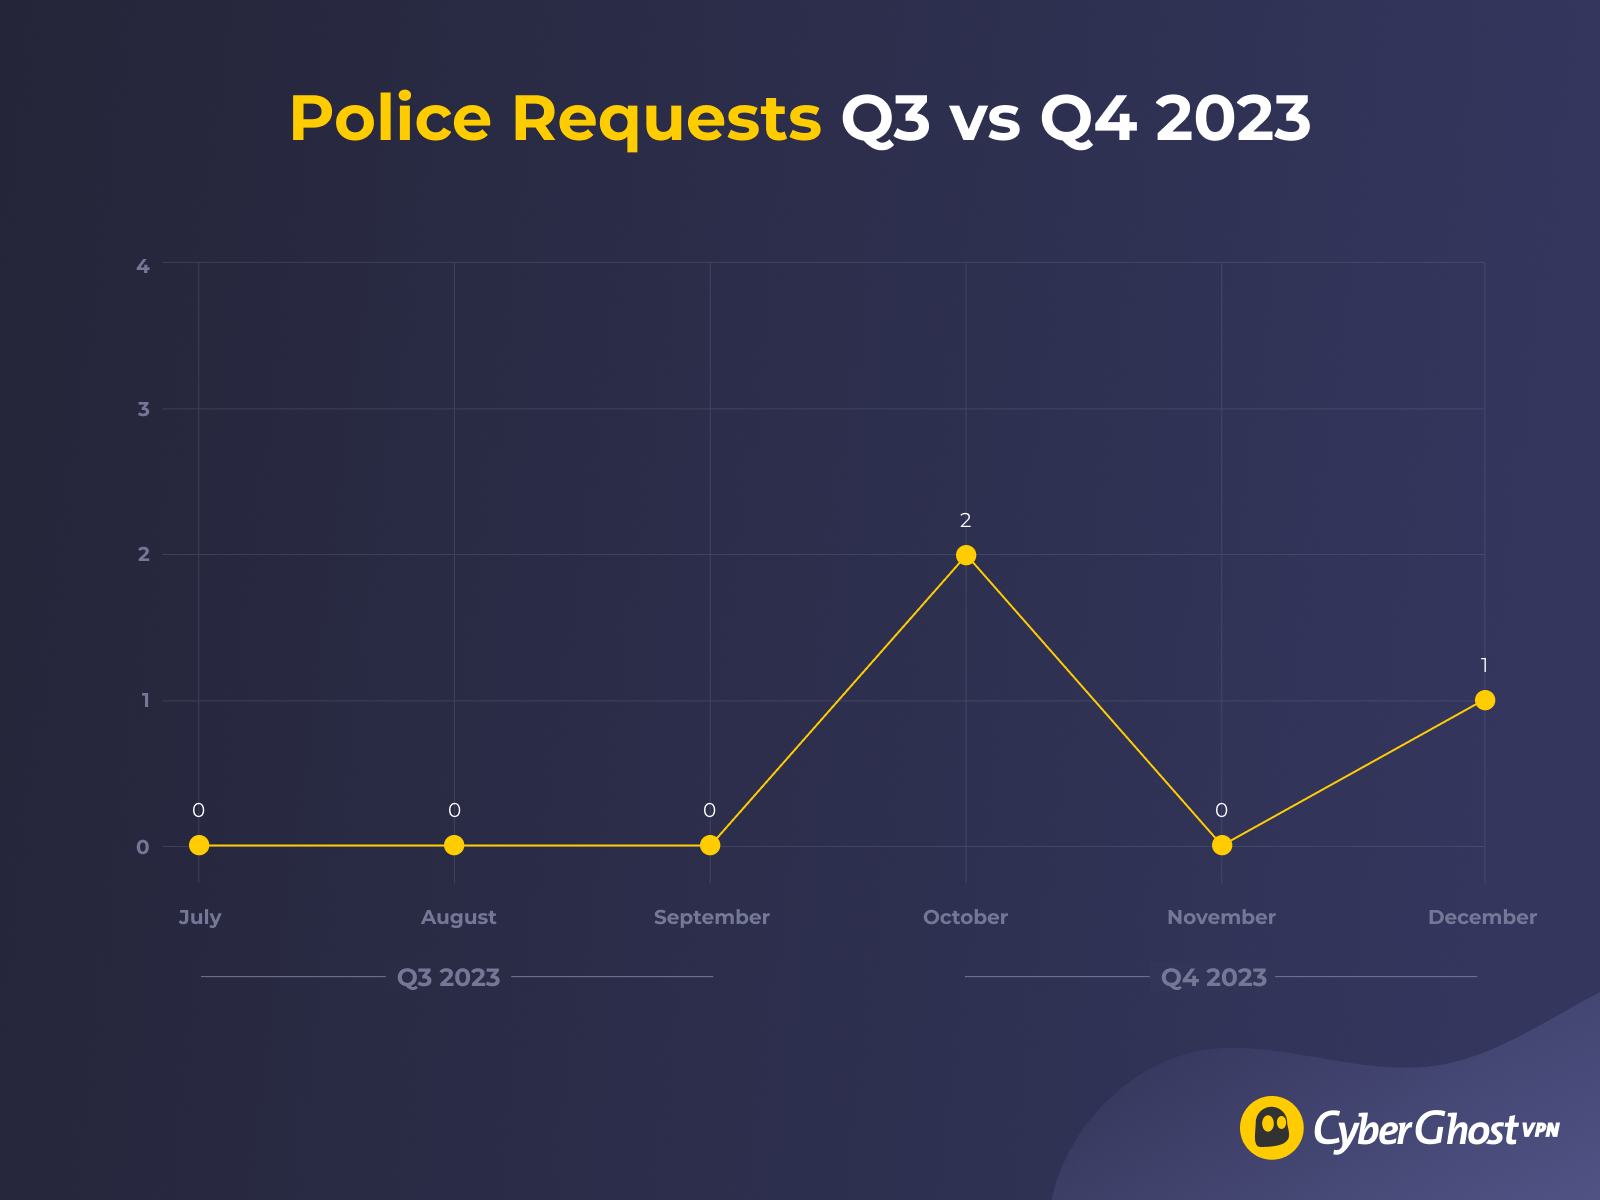 CyberGhost VPN's Quarterly Transparency Report numbers for Police Requests Q4 2023